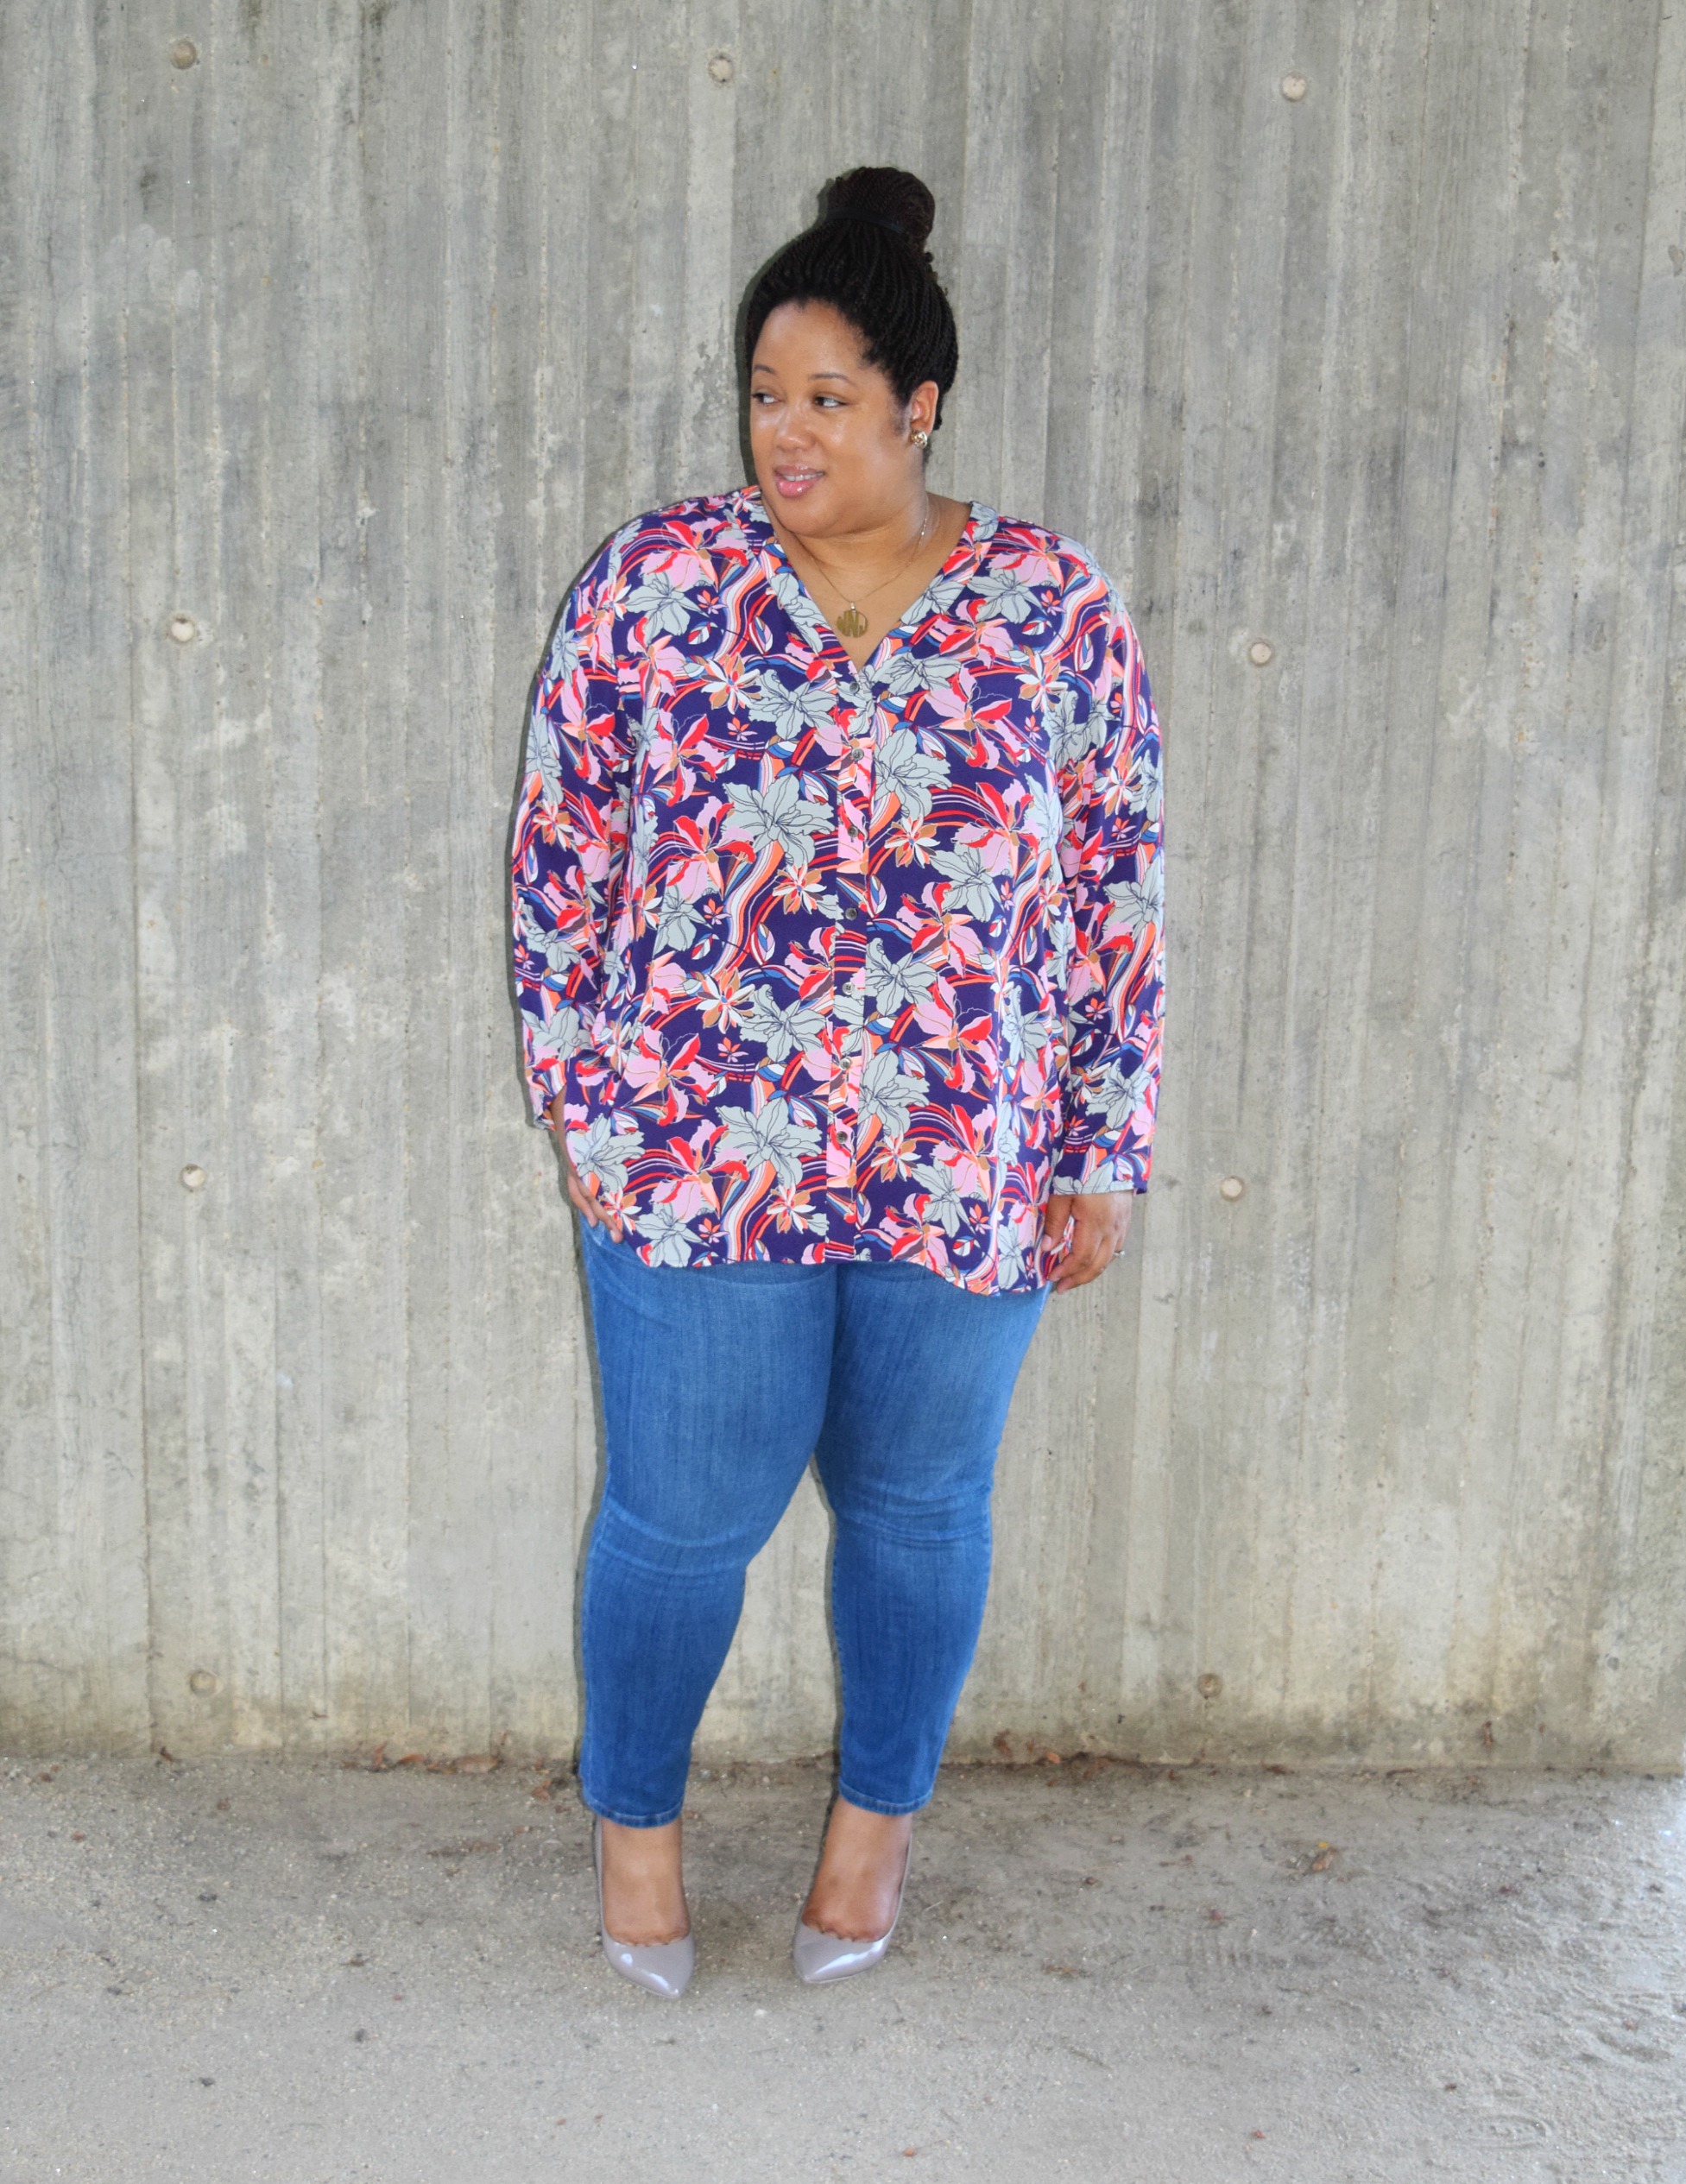 Style Denim and a Floral Blouse